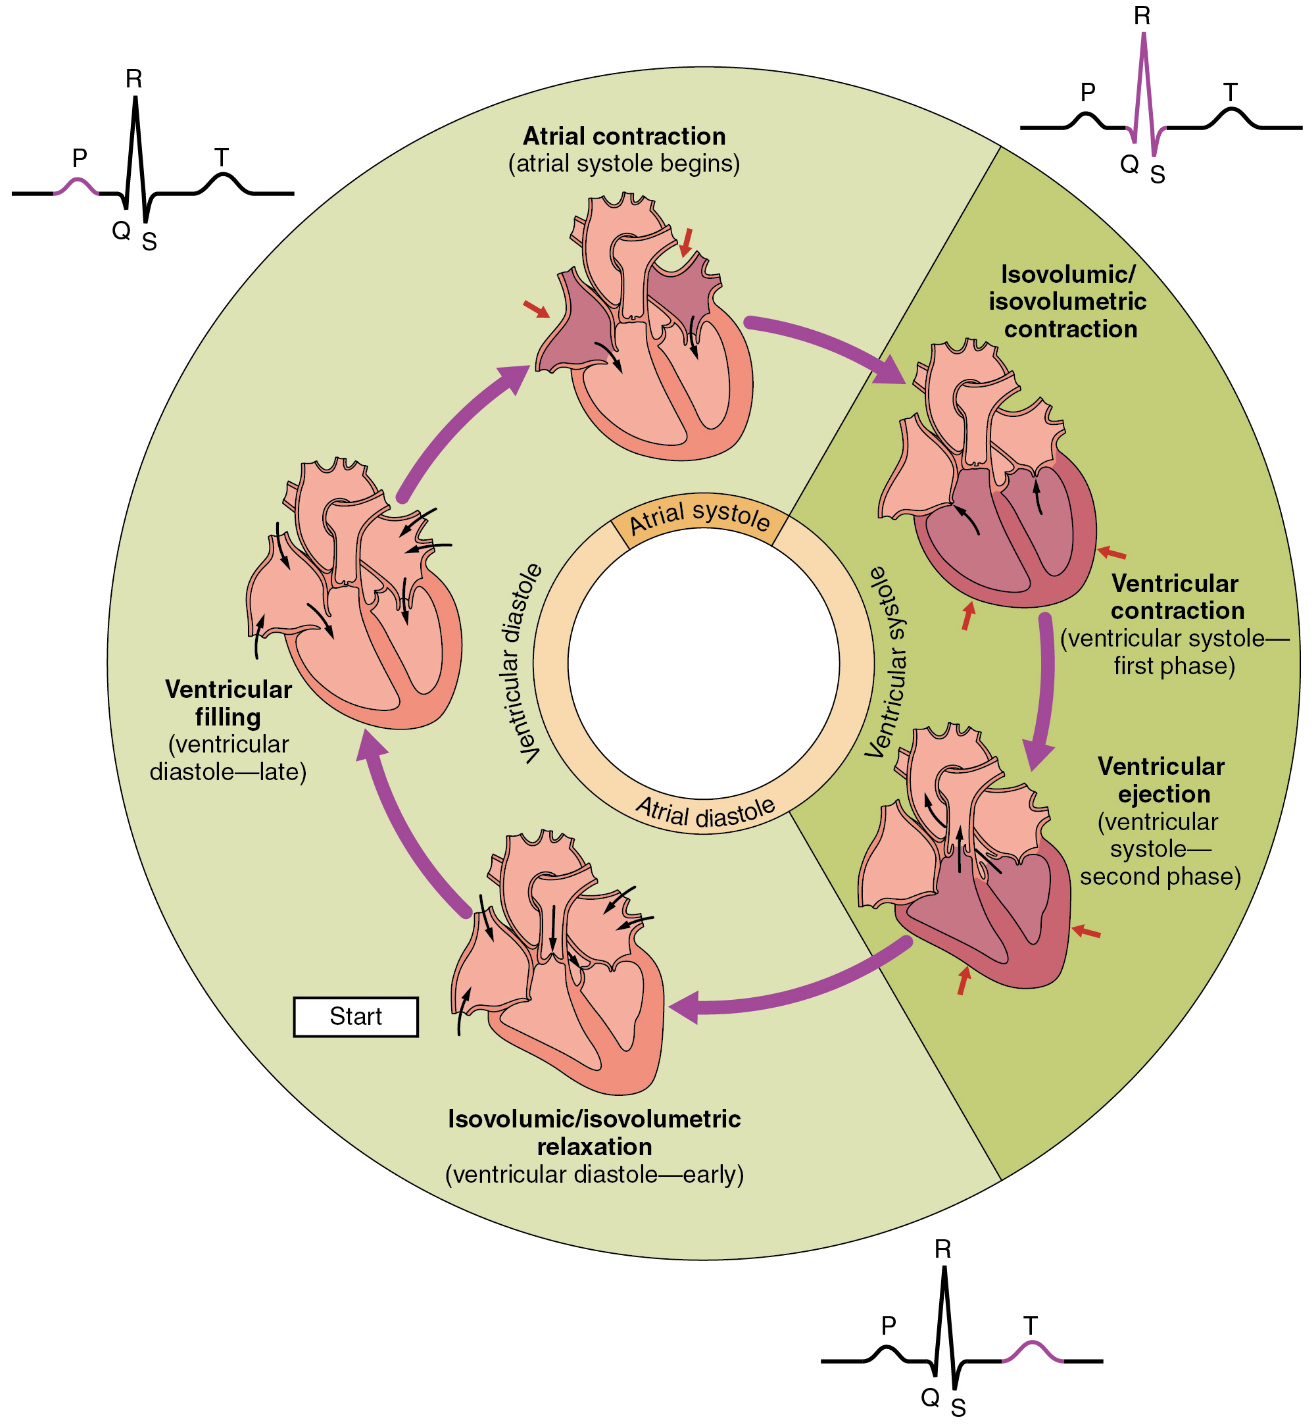 Diagram showing the series of events in the cardiac cycle relating them to the phases of contraction and the PQRST wave